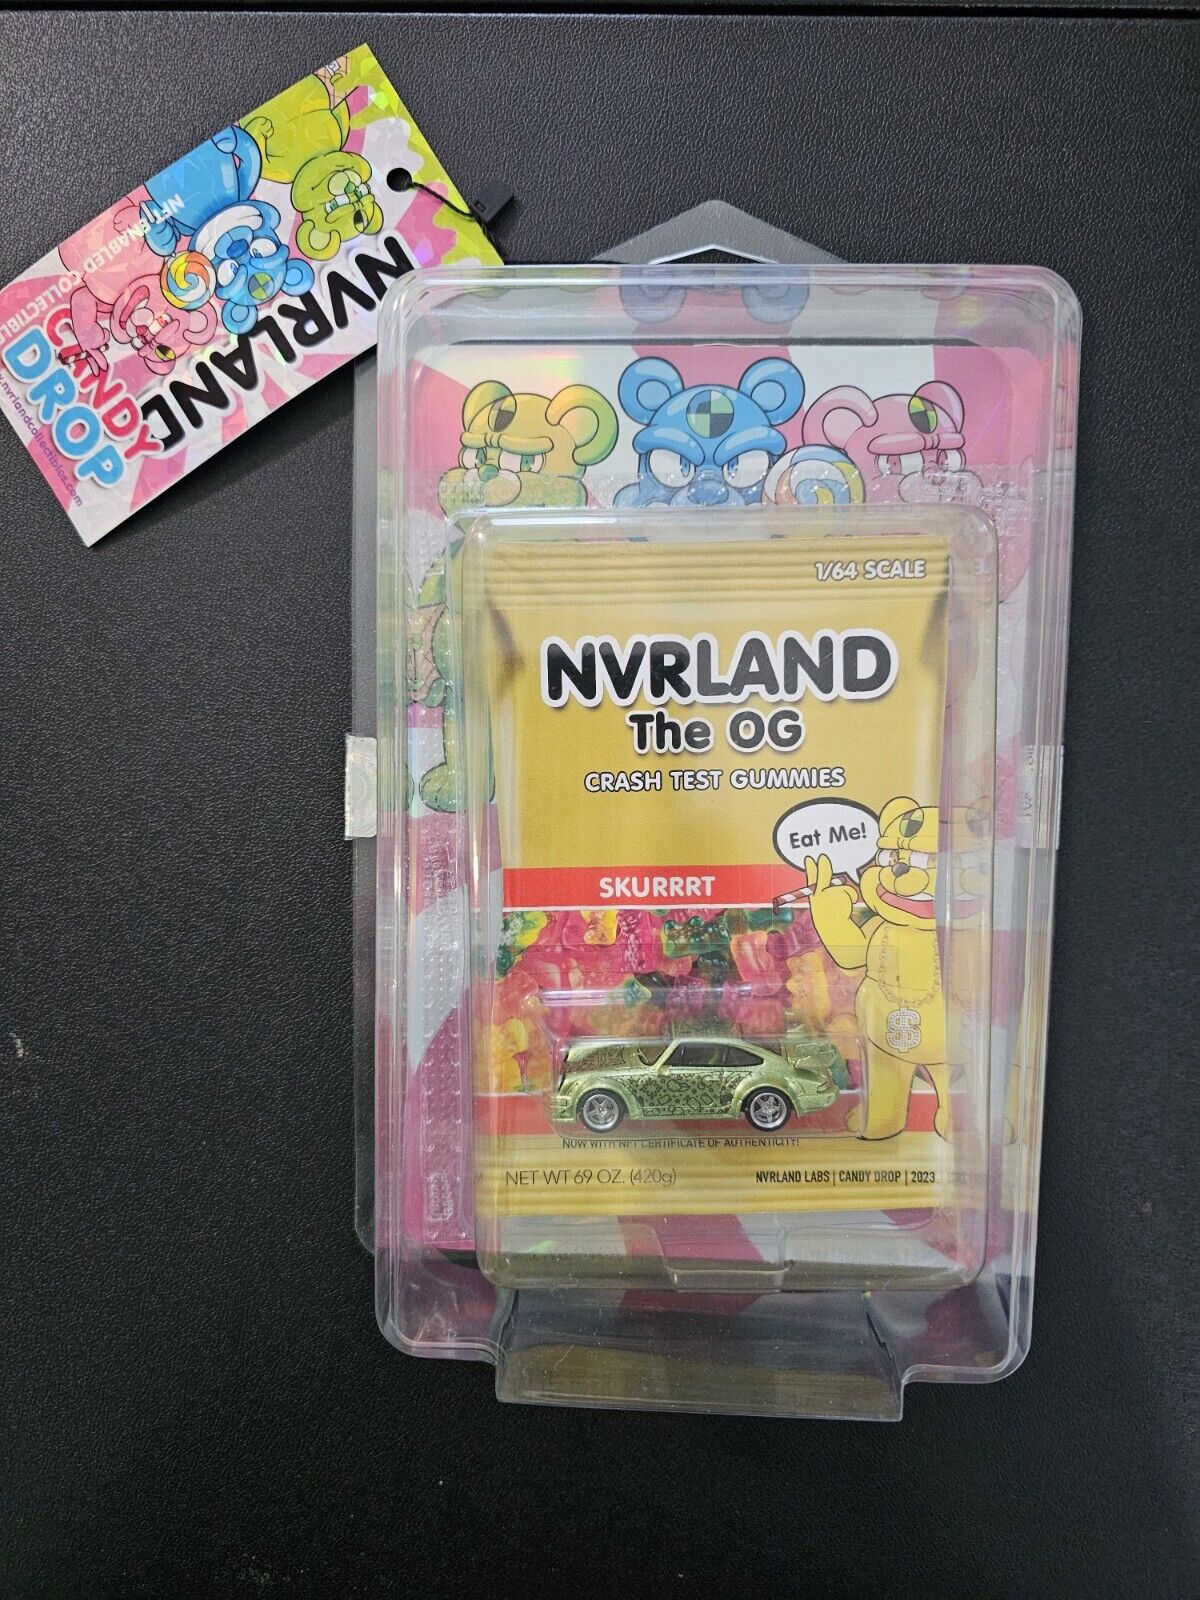 Nvrland Candy Drop Porsches "Mr. MONOPOLY "  And "Skurrrt" Very Limited 